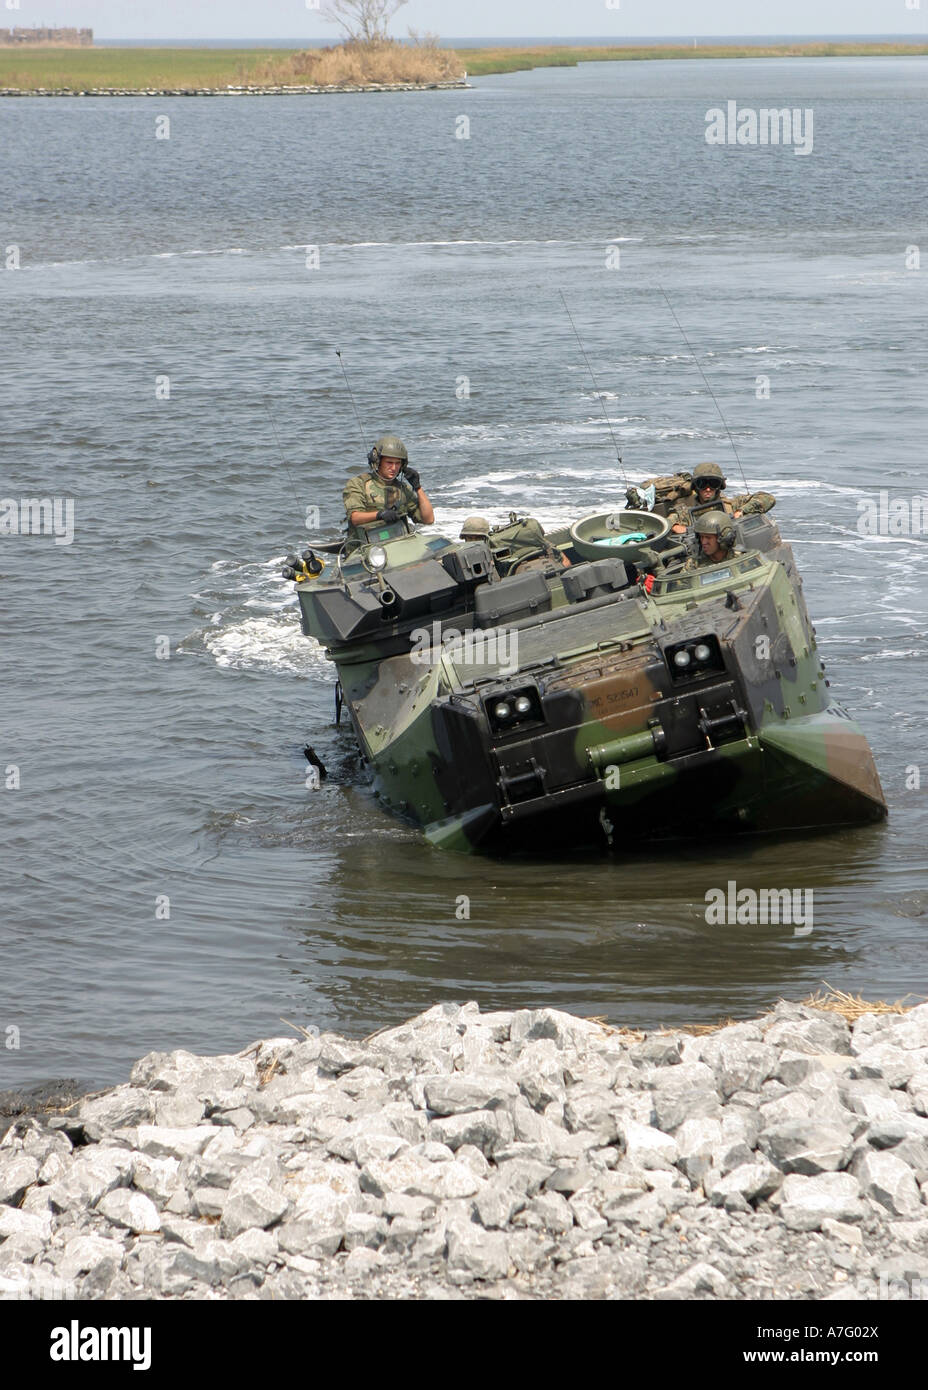 An amphibious assault vehicle climbs out of water as it arrives at a remote community to conduct search and rescue operations. Stock Photo